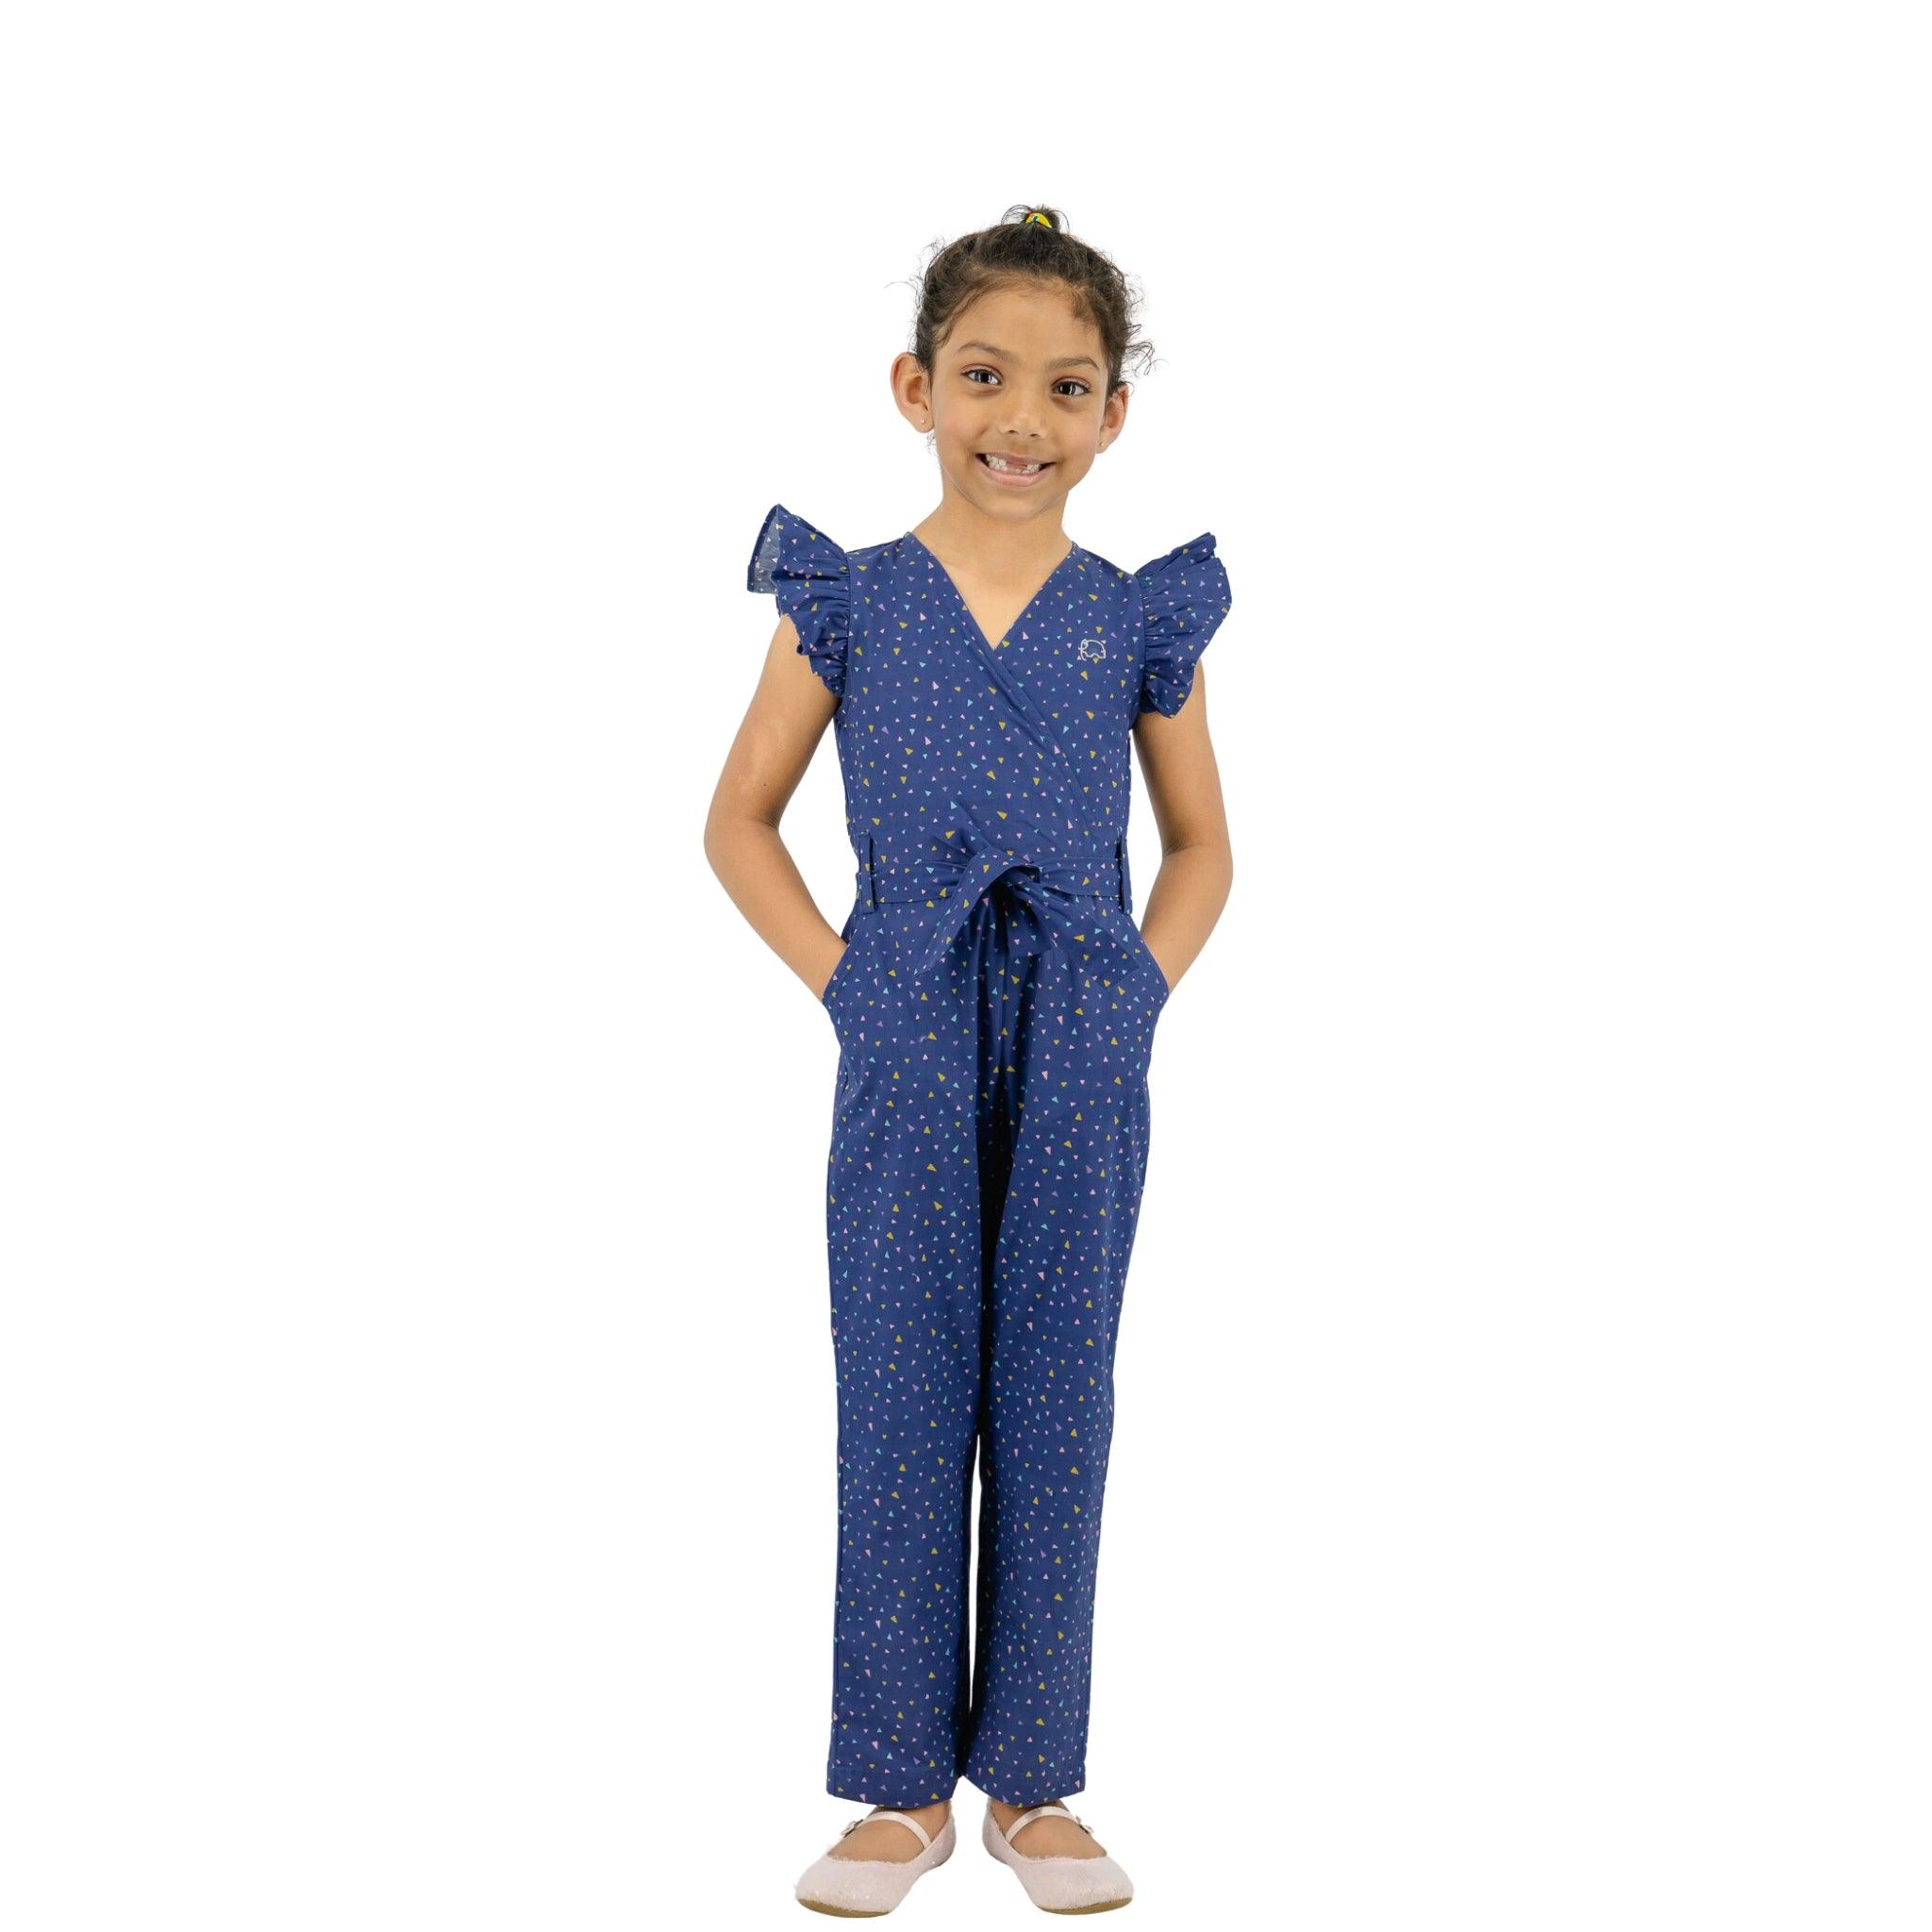 Young girl in a Karee Estate Blue Cotton V-Neck jumpsuit standing with hands behind back, smiling at the camera on a white background.